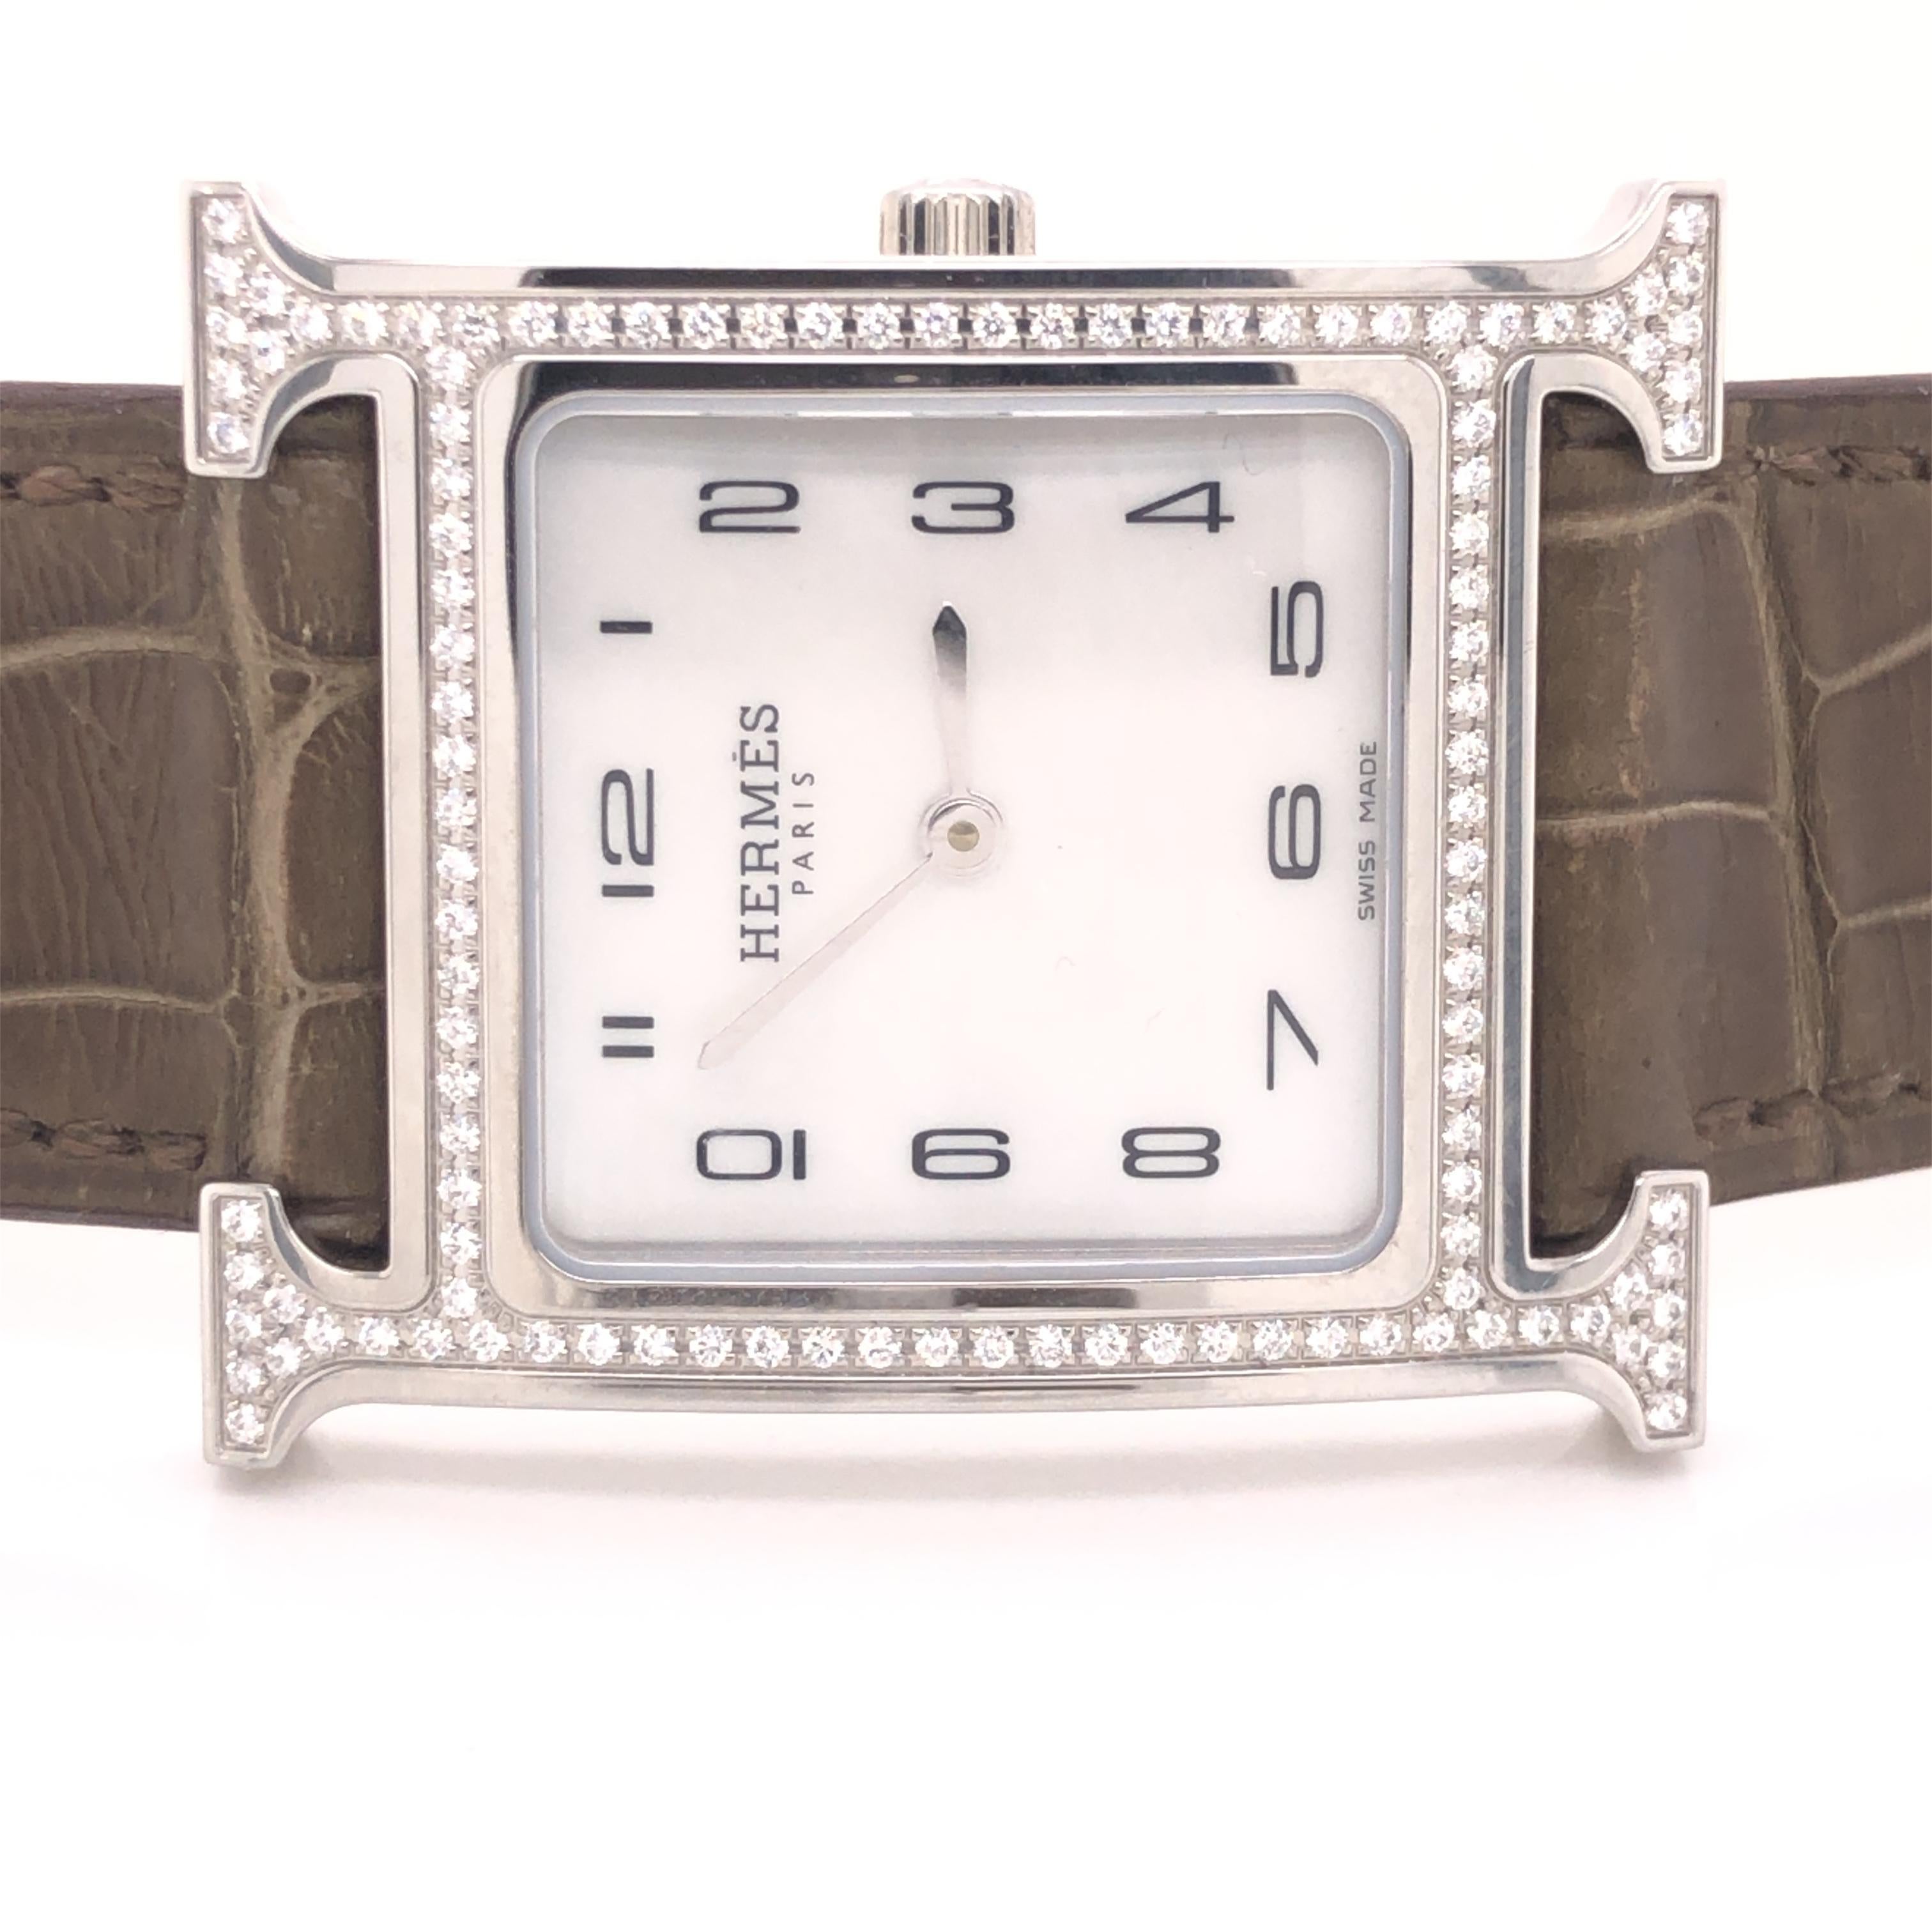 Gorgeous creation from famed fashion house Hermes. This amazing watch is called the Heure H which measures 26 x 26 mm.  The model is the Medium size, crafted in a steel case with feather setting. 112 round brilliant natural diamonds are set in the